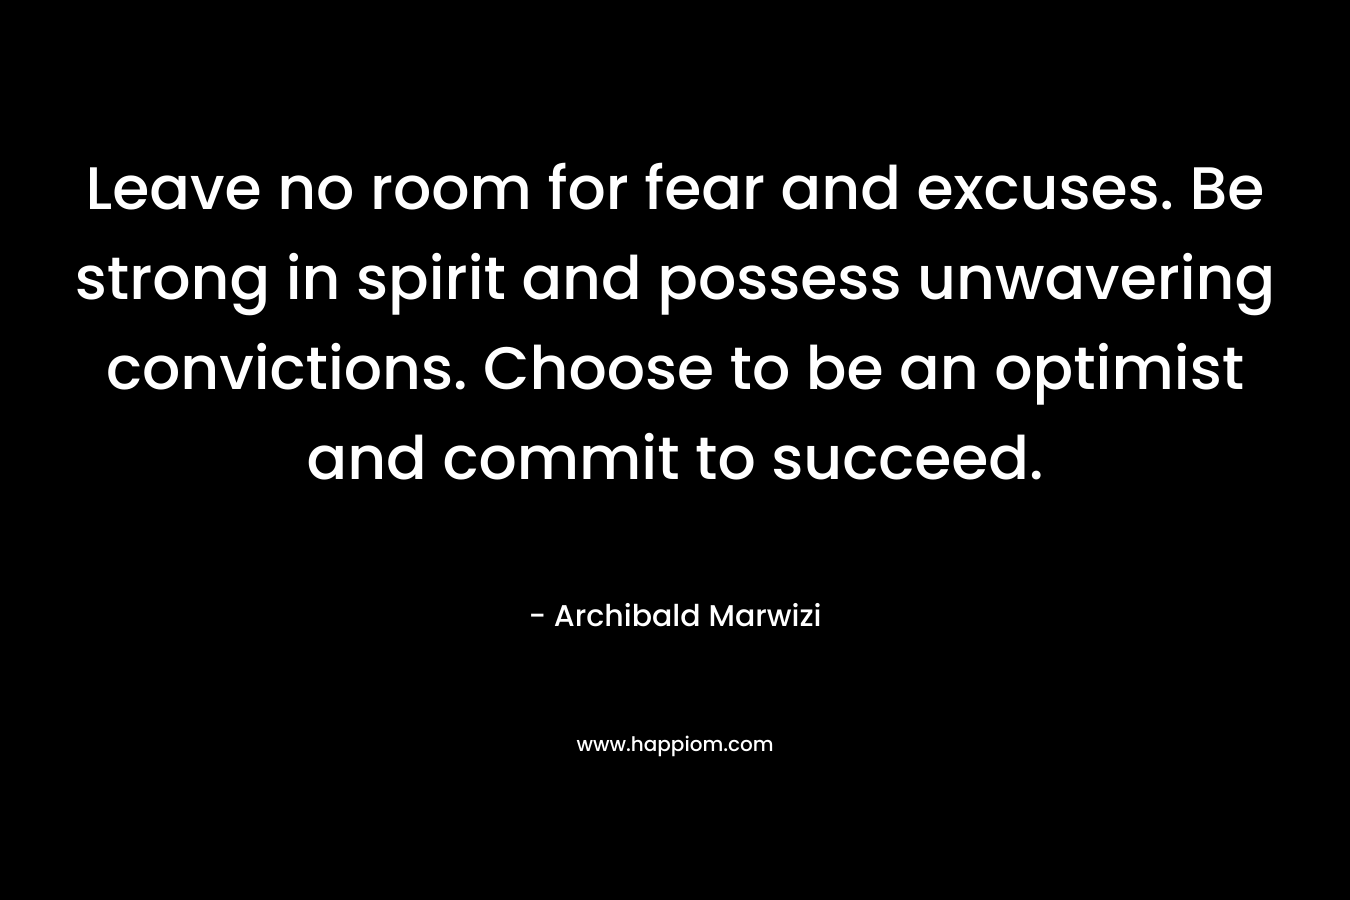 Leave no room for fear and excuses. Be strong in spirit and possess unwavering convictions. Choose to be an optimist and commit to succeed. – Archibald Marwizi